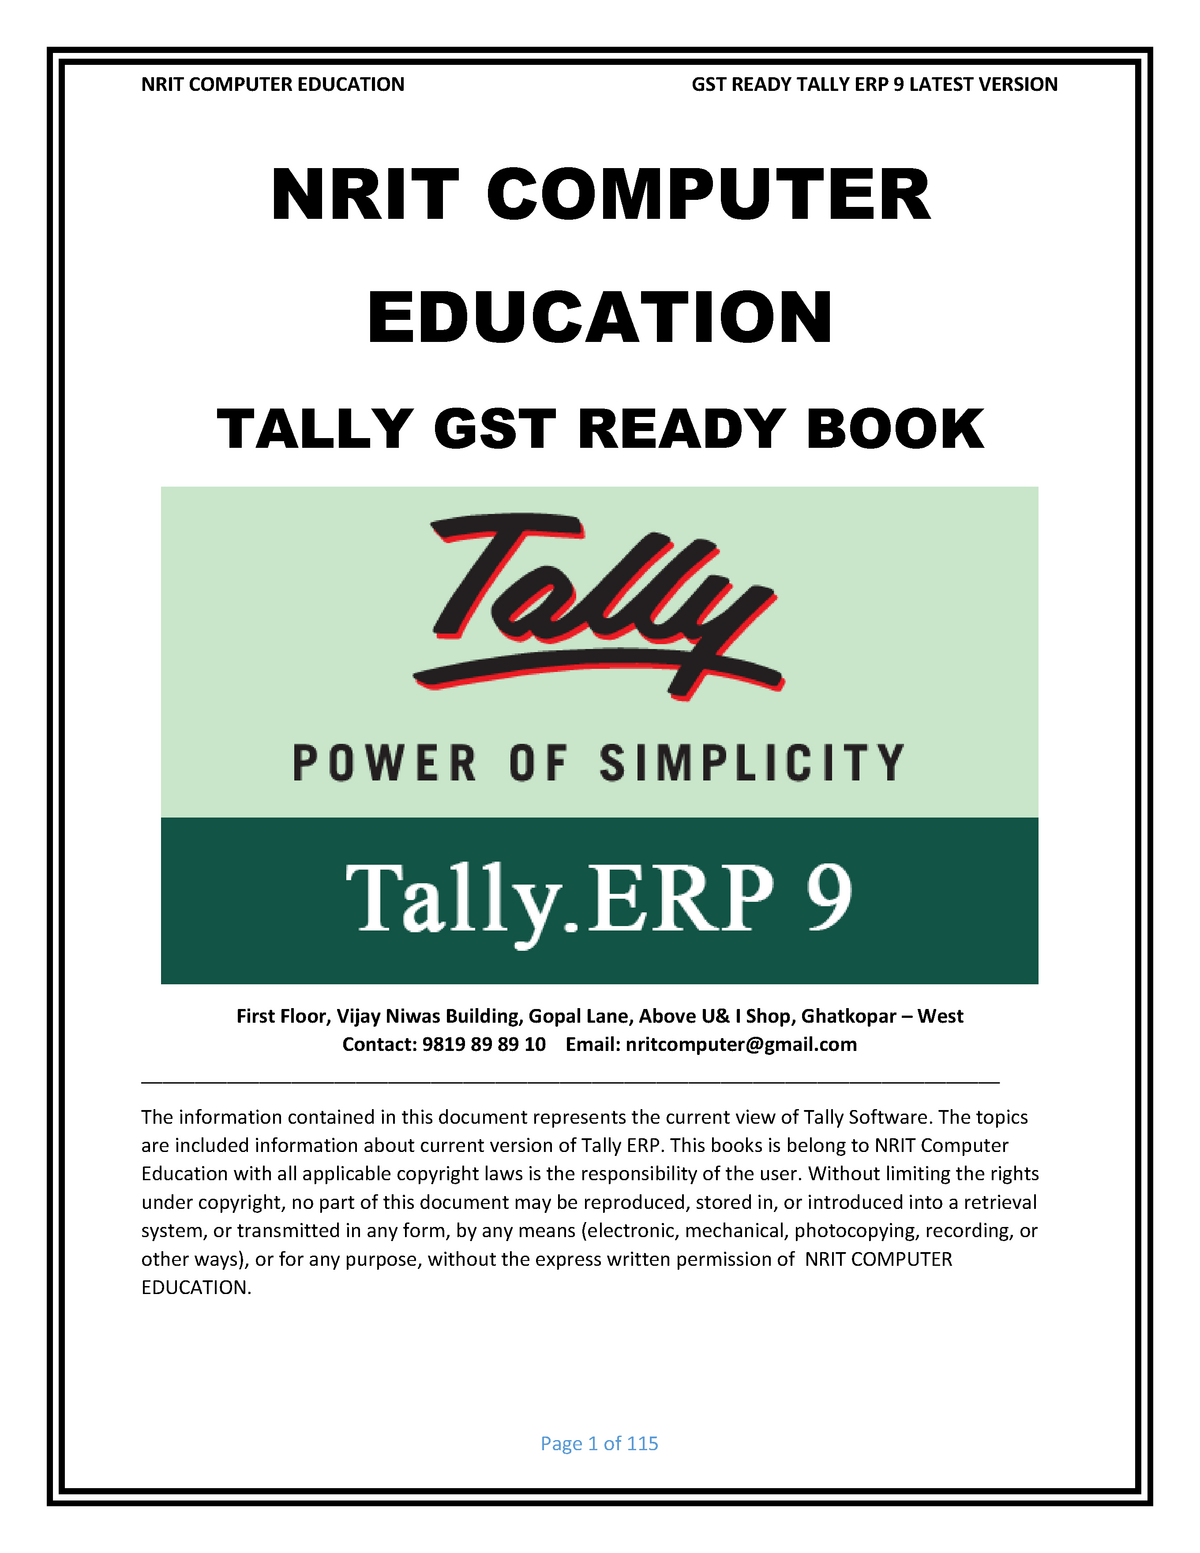 tally erp 9 assignment pdf free download in english